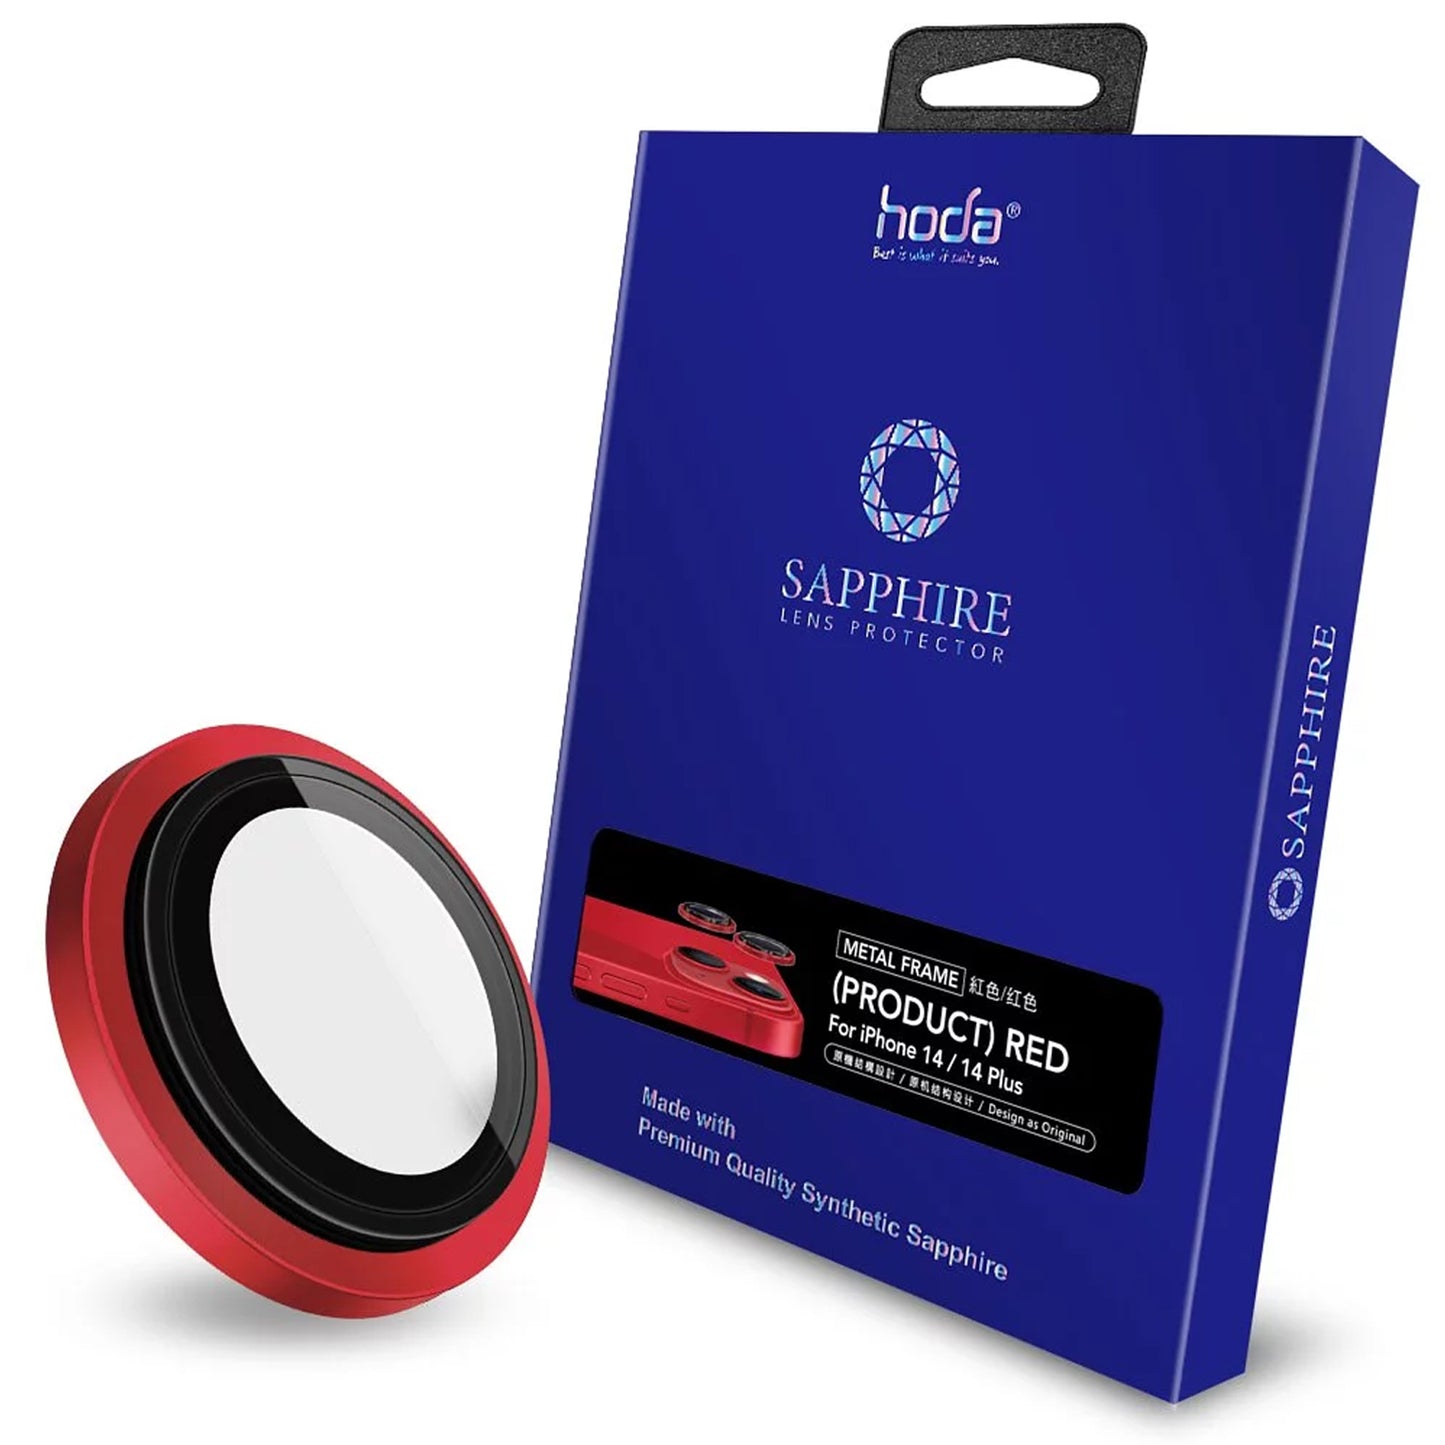 Hoda Sapphire Lens Protector for iPhone 14 - 14 Plus - Red (3pcs) (Barcode: 4711103546604 )